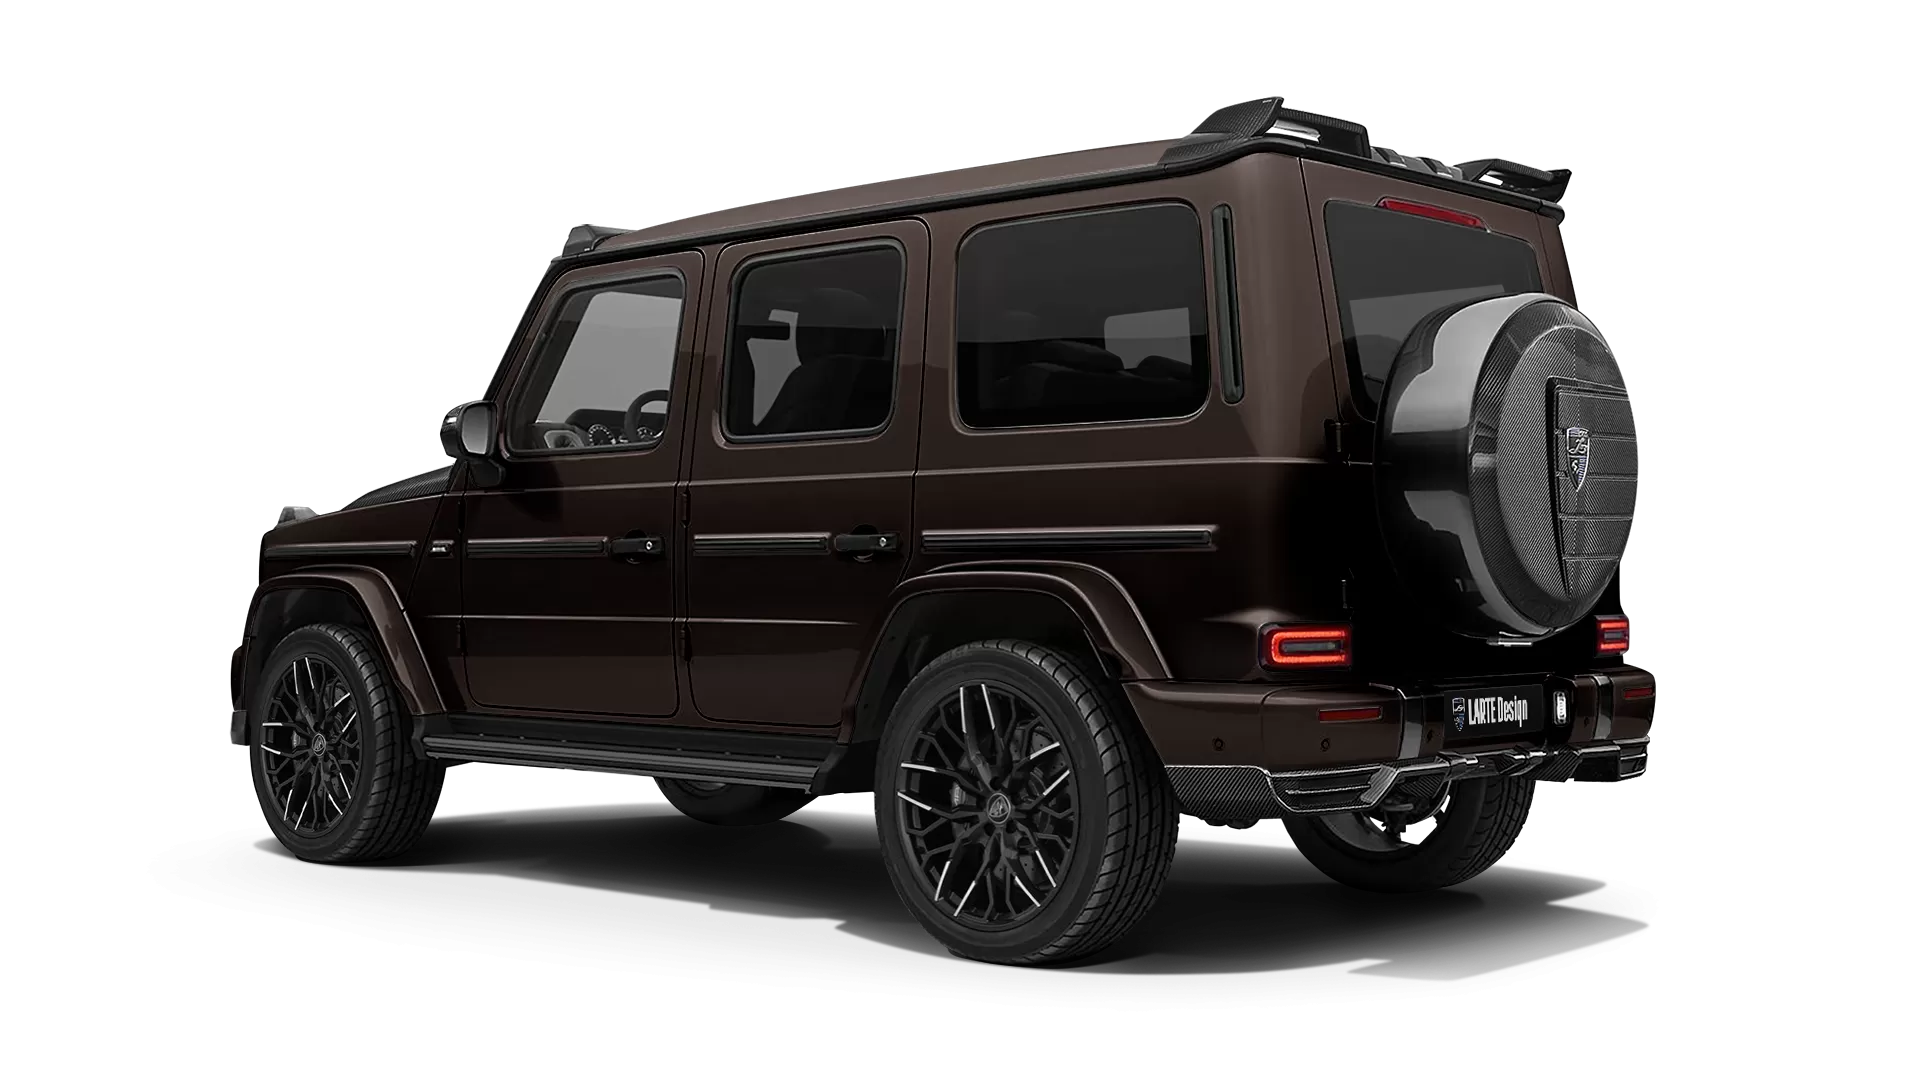 Mercedes G class W463 with carbon body kit: back view shown in Citrine Brown